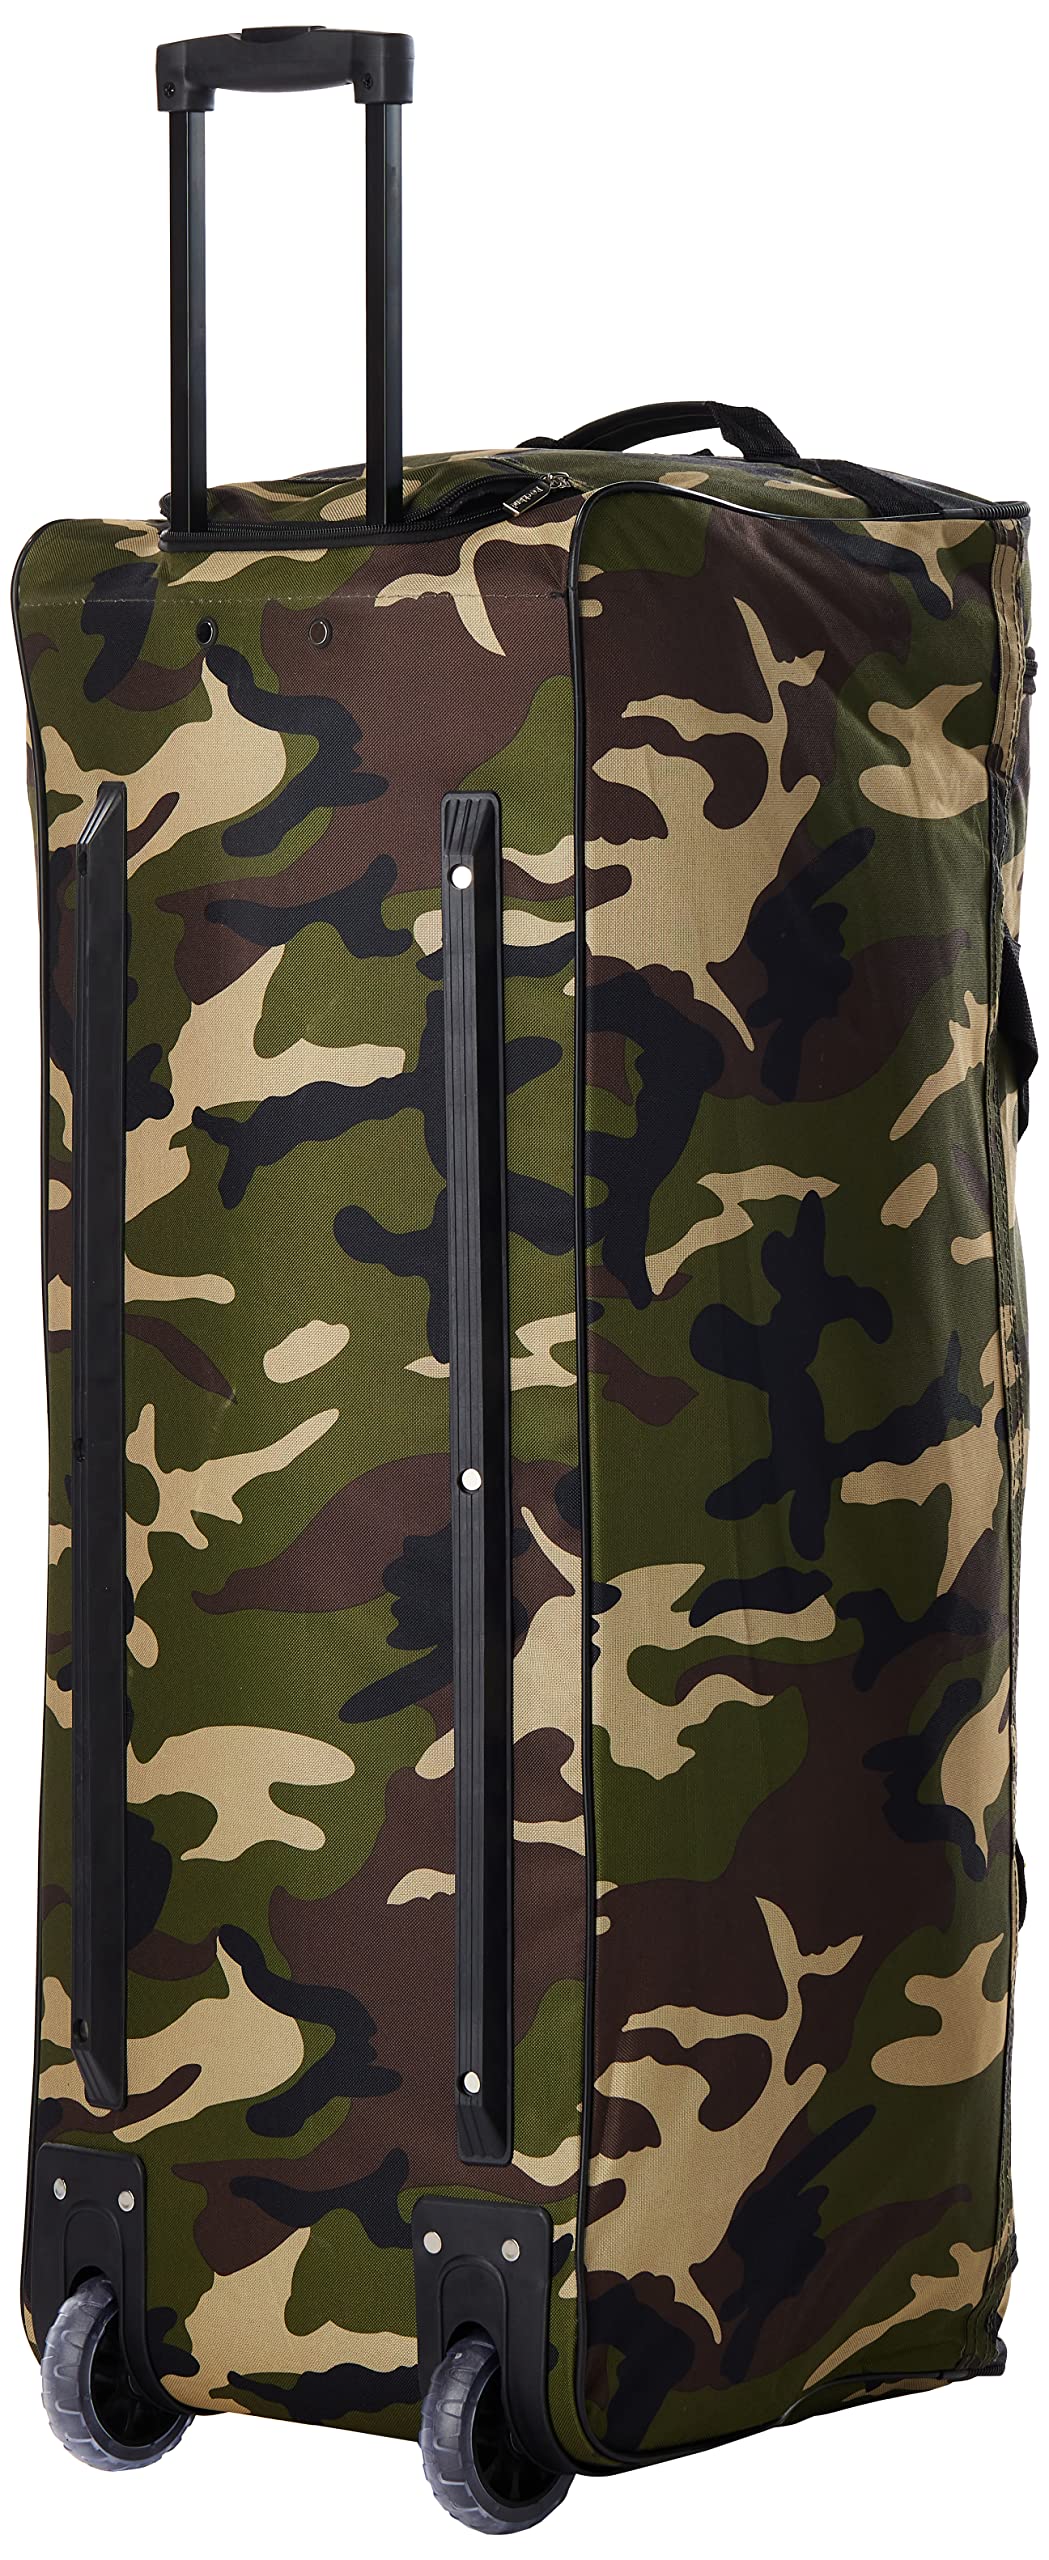 30" Rockland Rolling Duffel Bag (Camouflage) $28.90 + Free Shipping